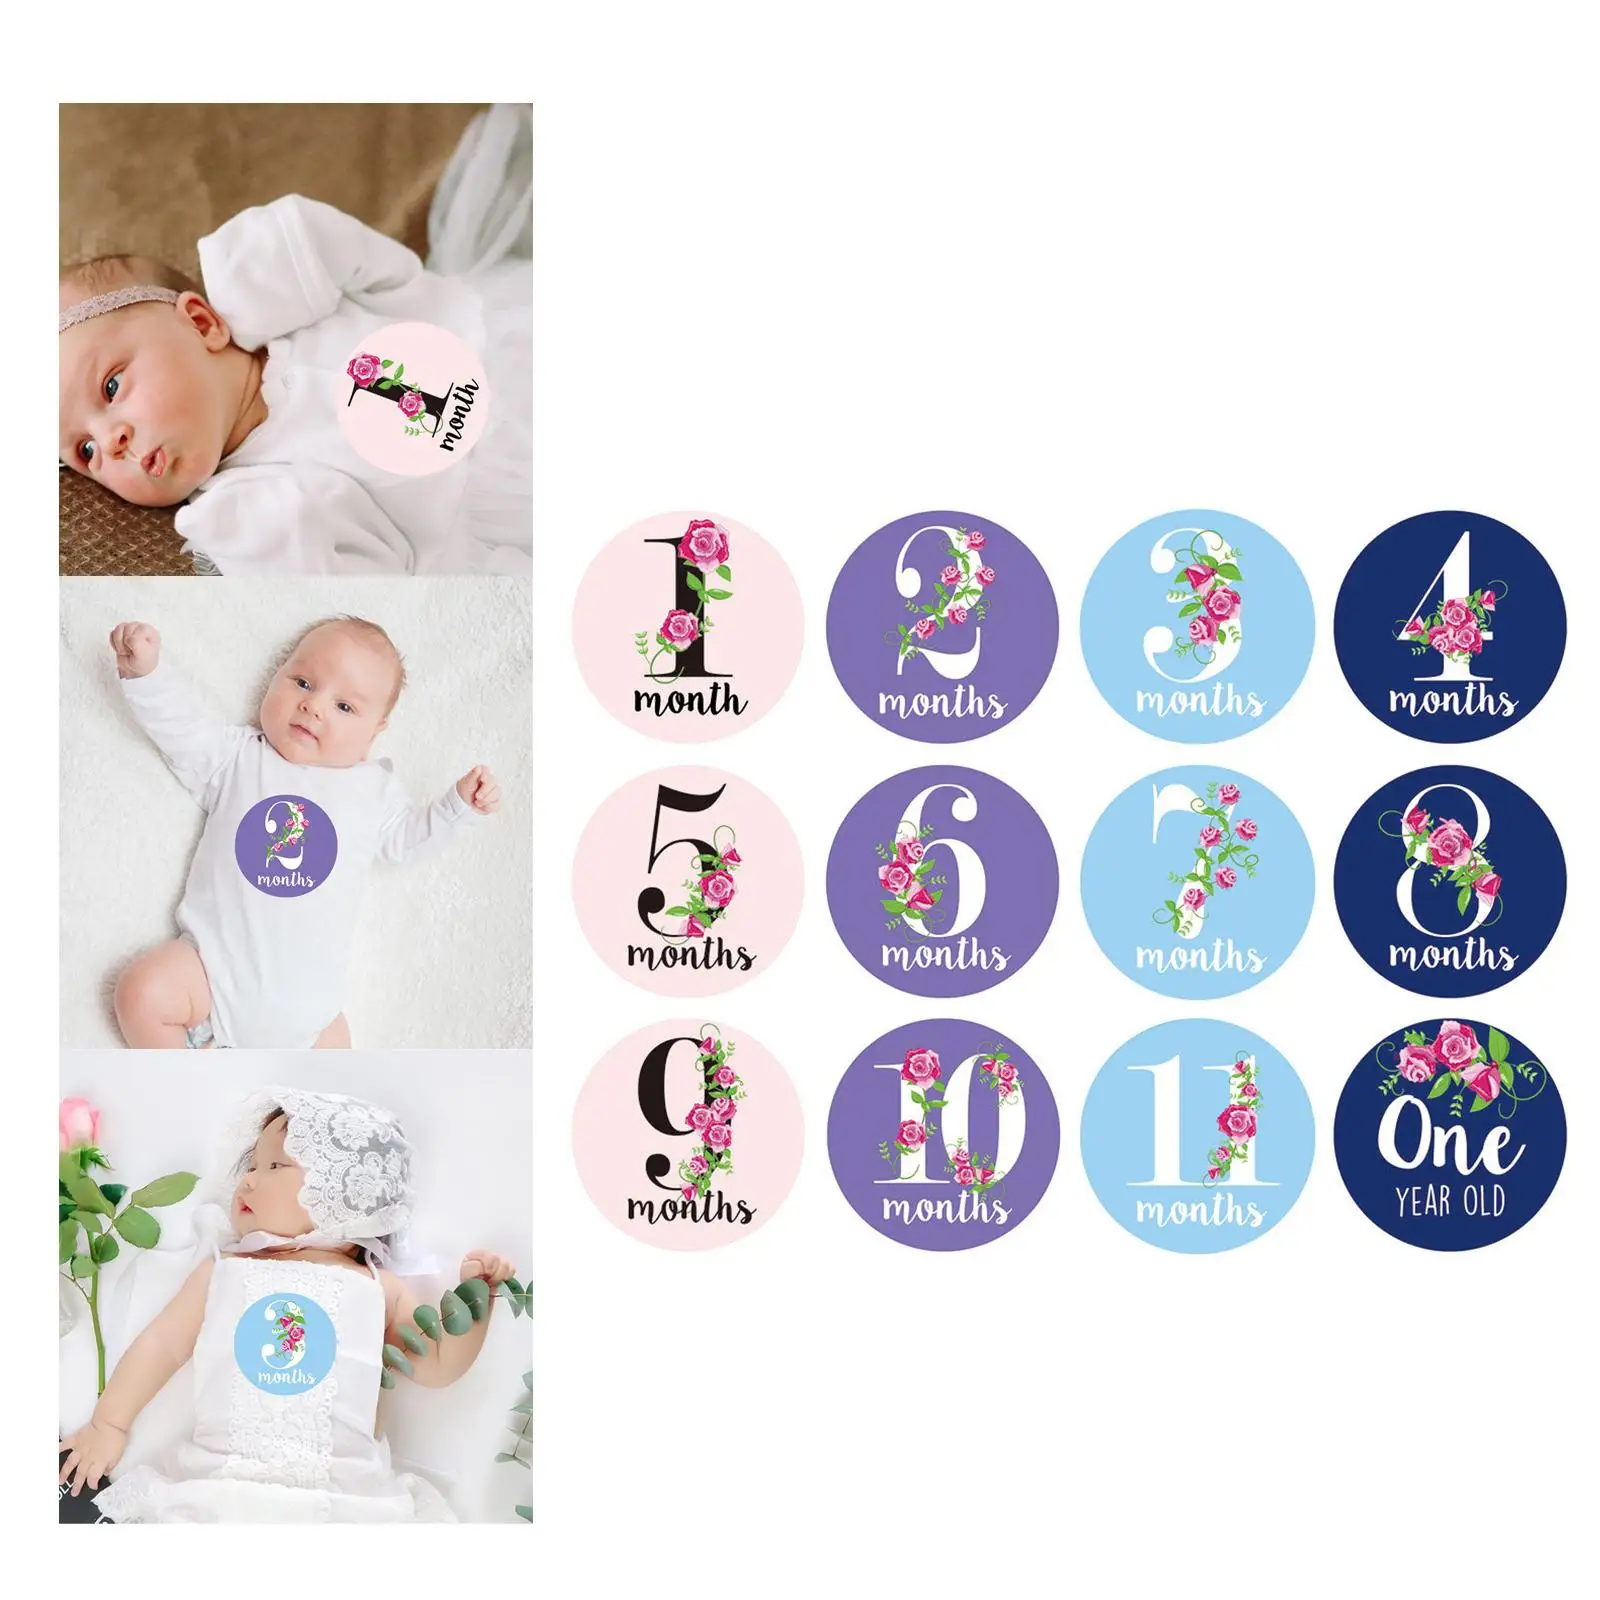 Baby Monthly  Stickers, Set of 1 Floral Month Stickers for Baby Boy or Girl, 2 Months Stickers, Baby  for Photo